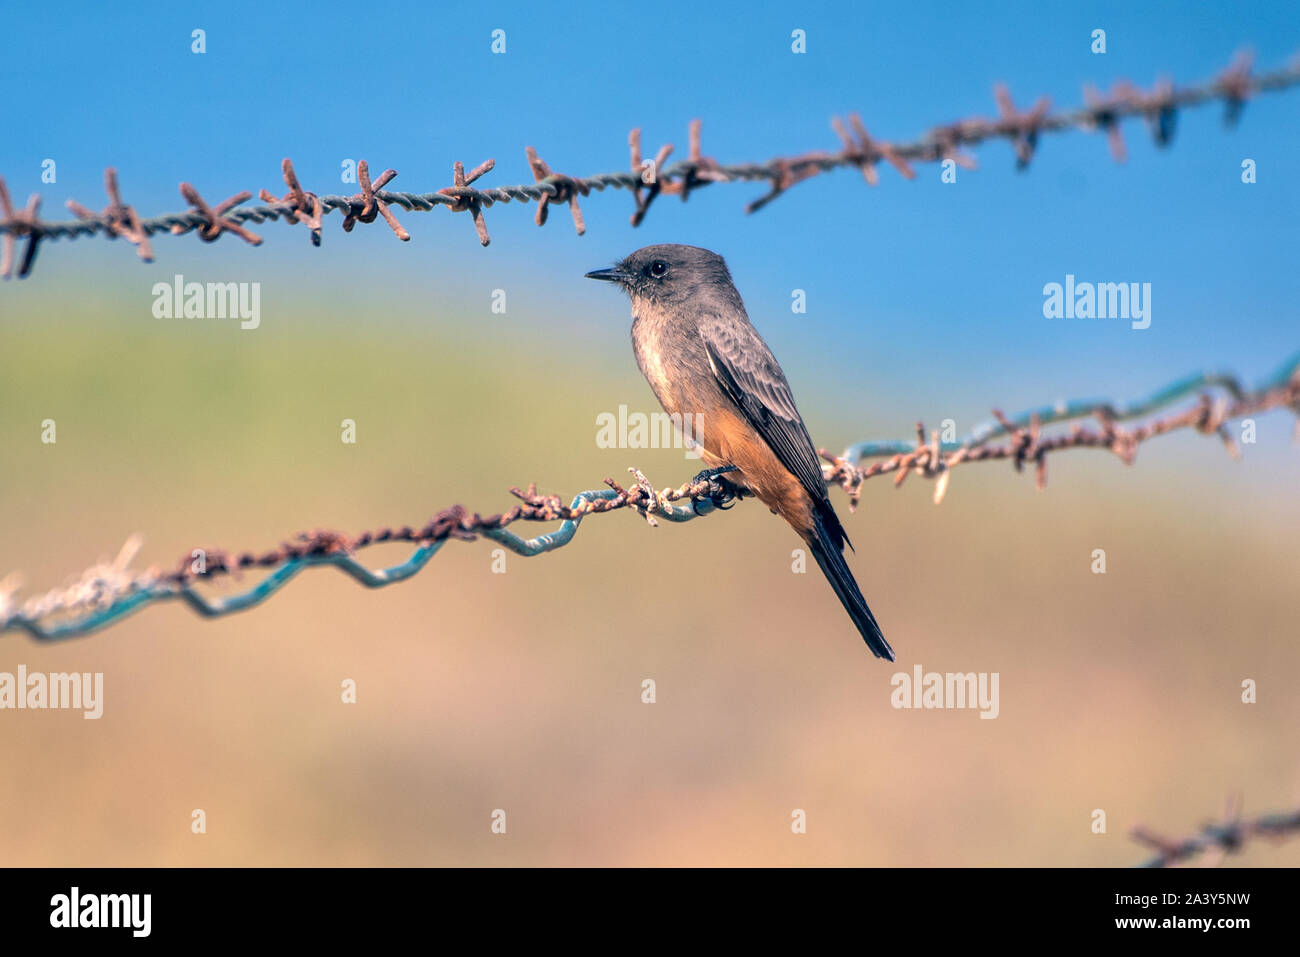 Cute Say's Phoebe bird clinging to sharp barbed wire fencing while looking to left. Stock Photo